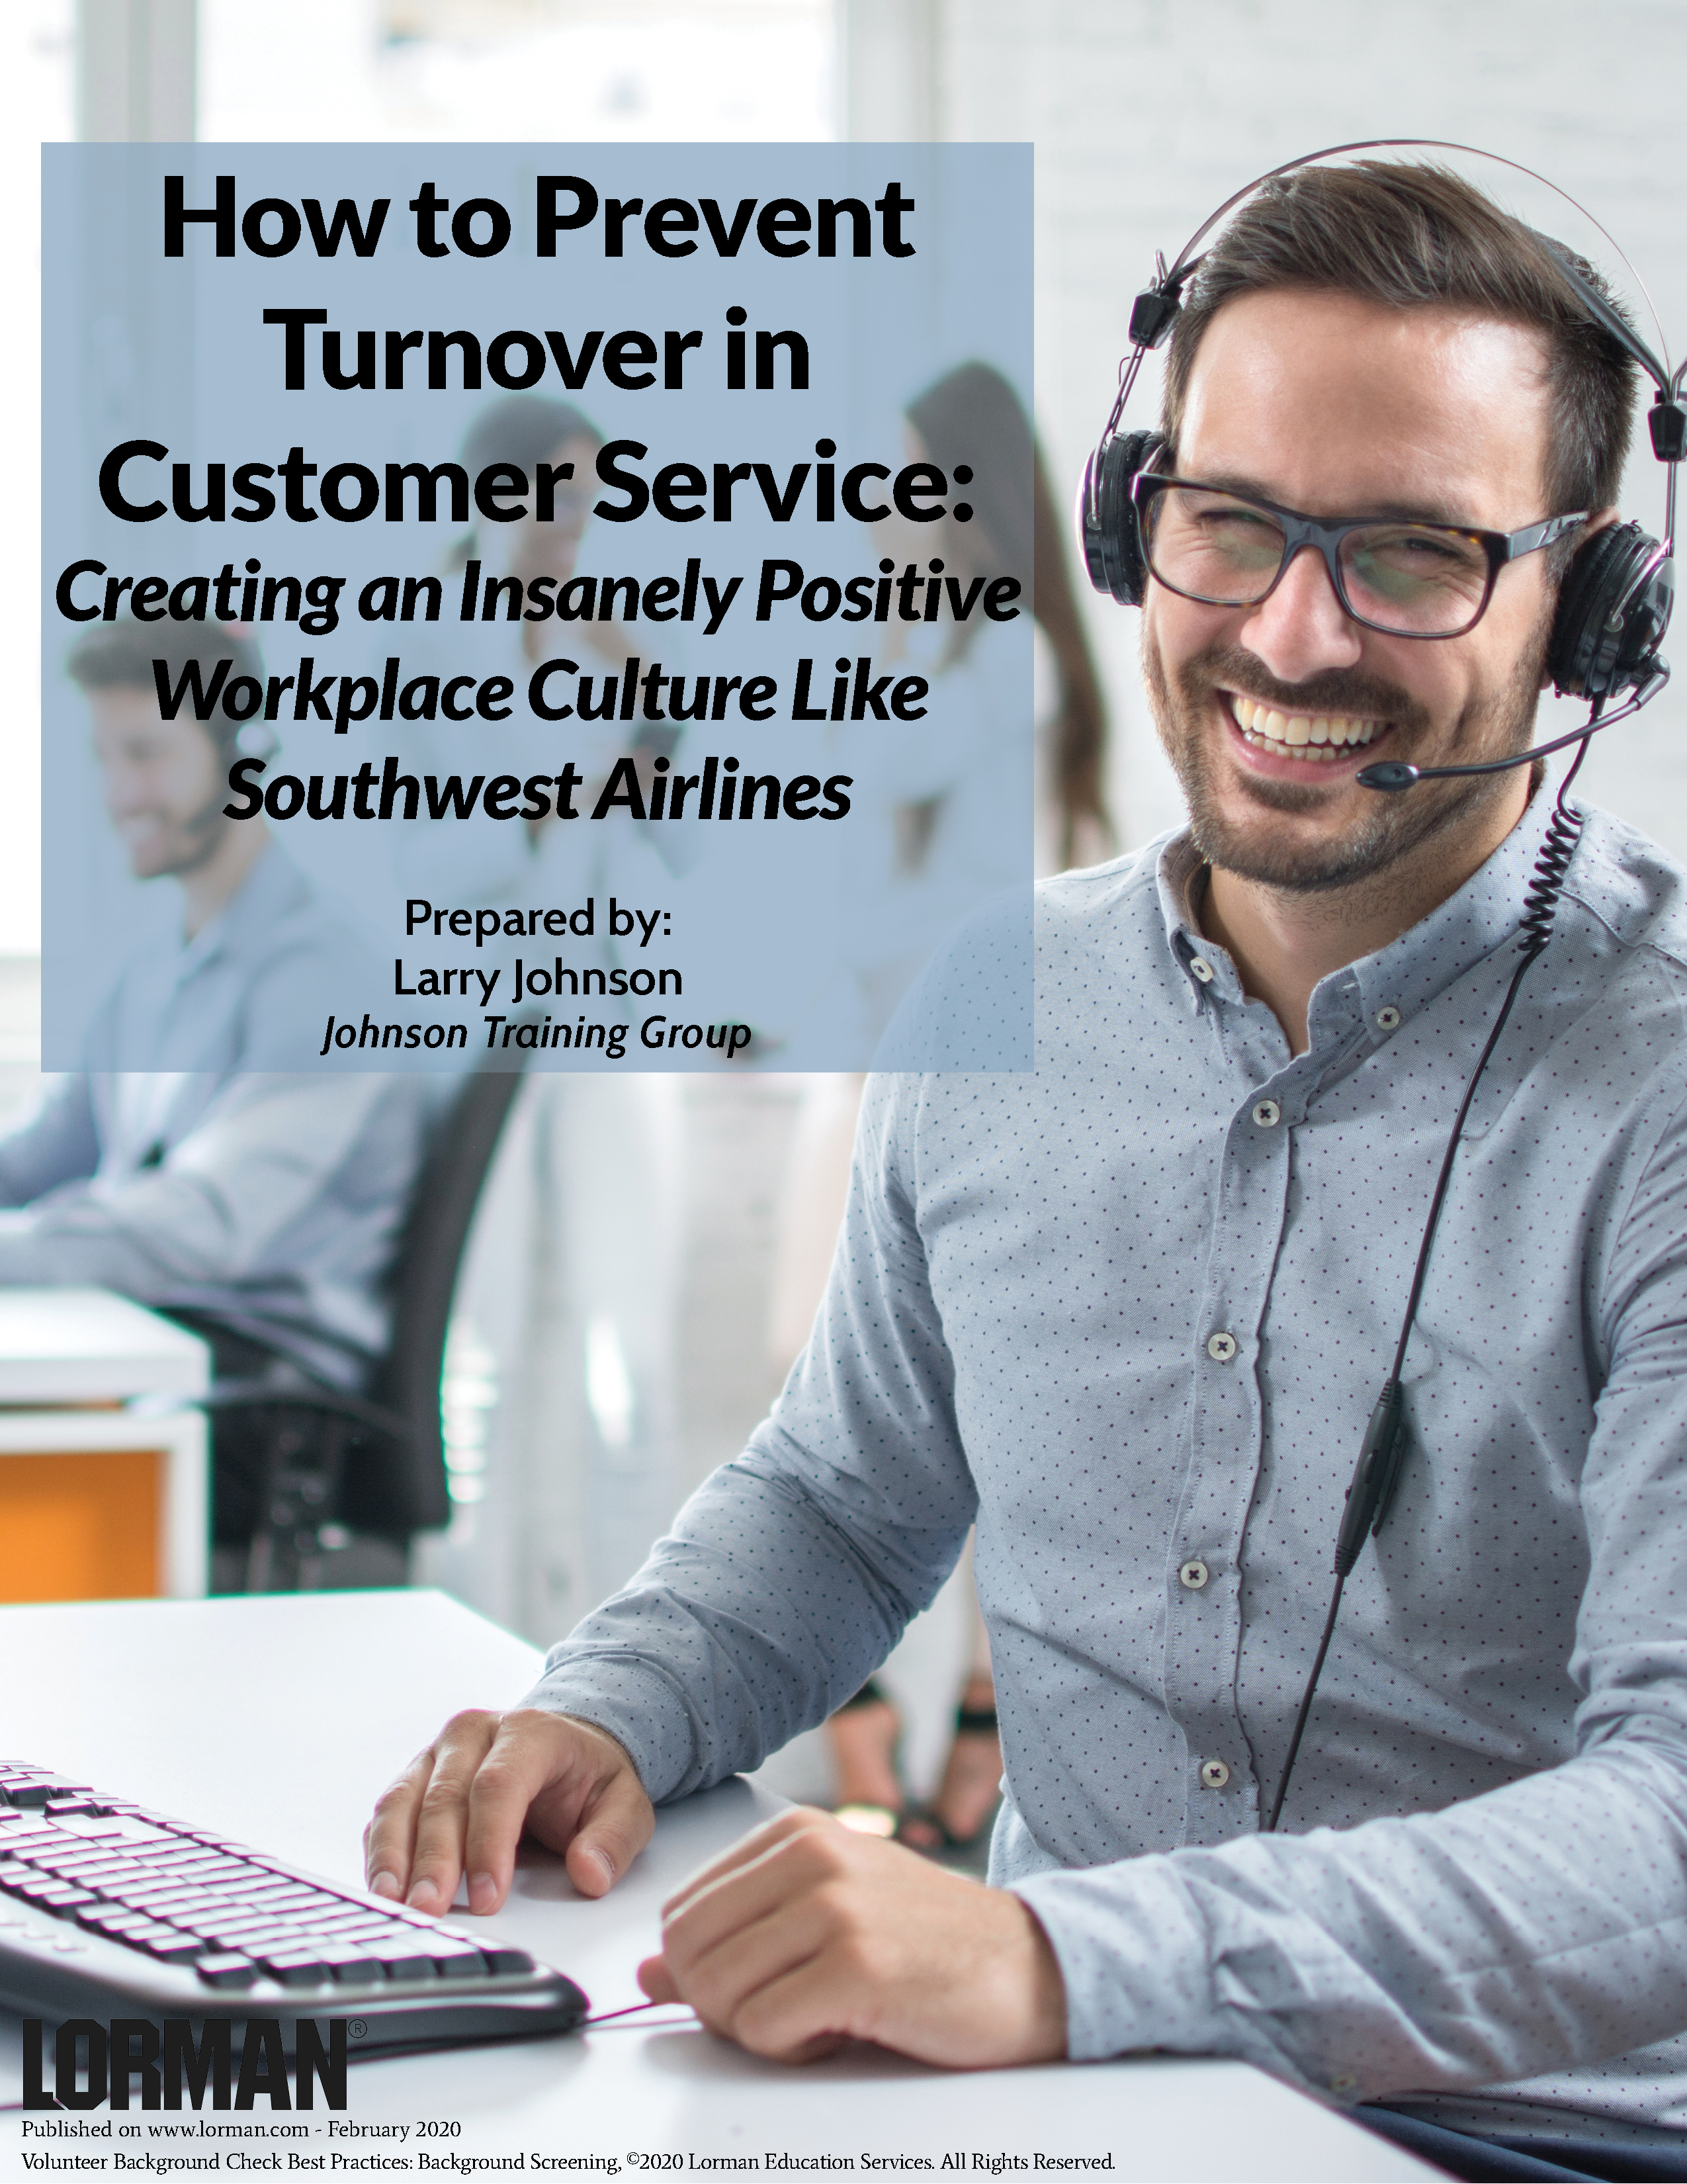 How to Prevent Turnover in Customer Service